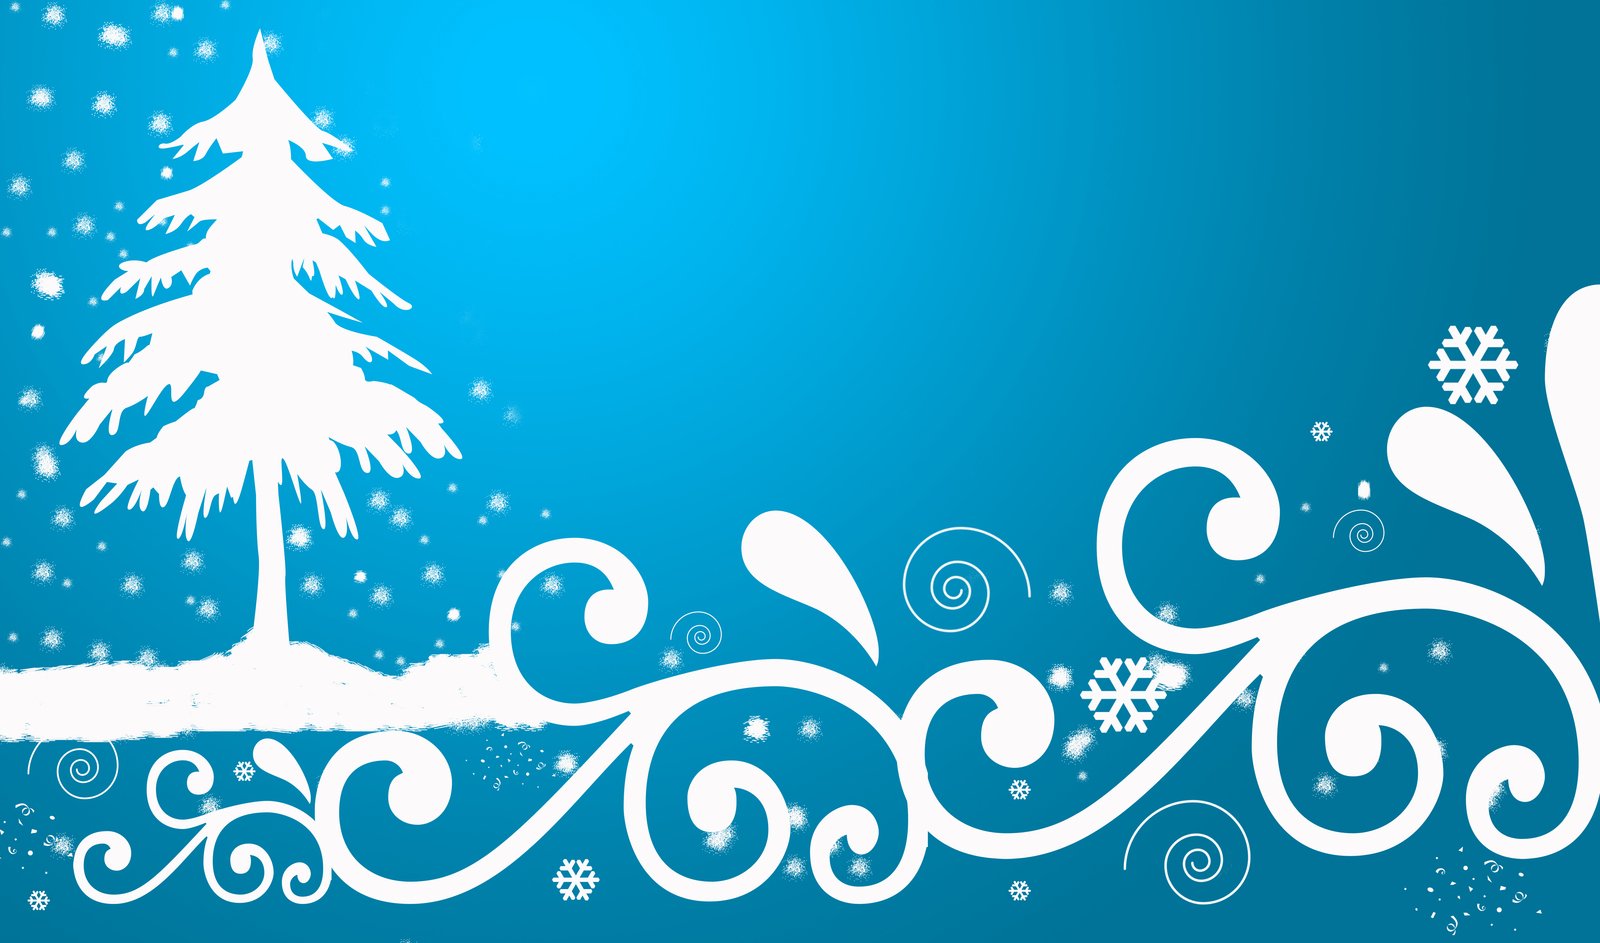 a blue winter background with white snowflakes and trees